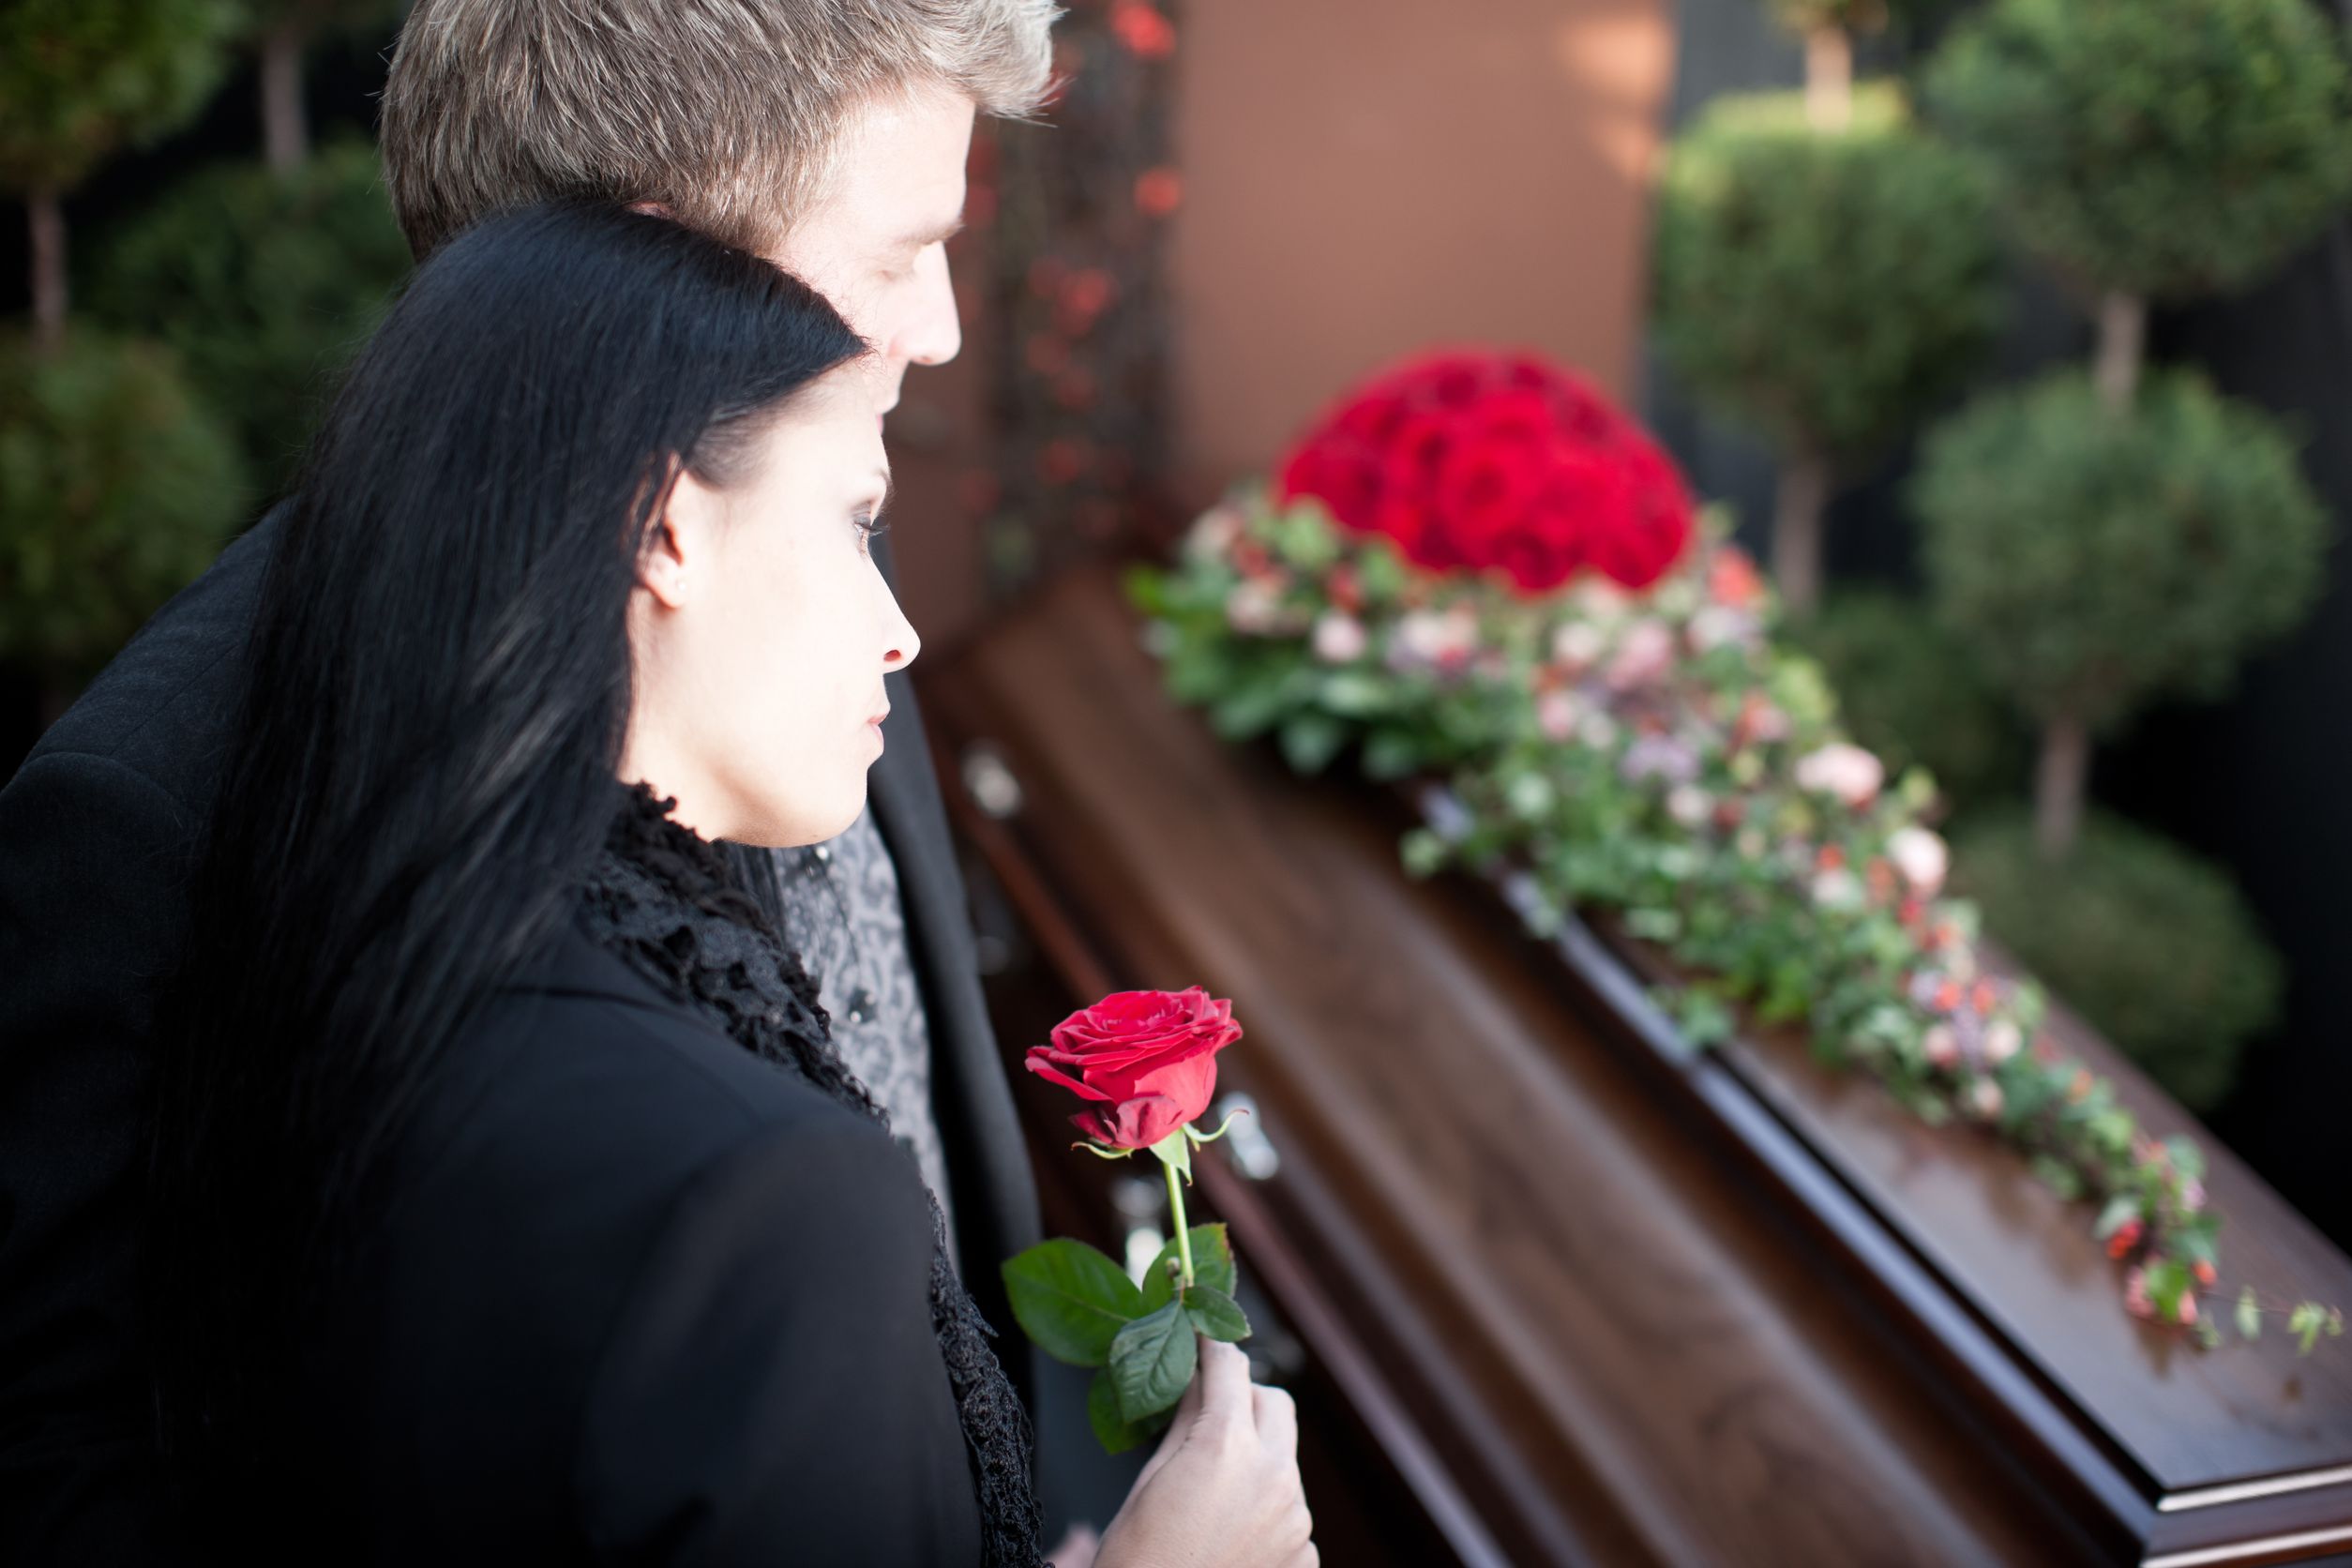 Advantages of Contacting Funeral Homes in Bel Air about pre-planning in Bel Air for your Final Arrangements